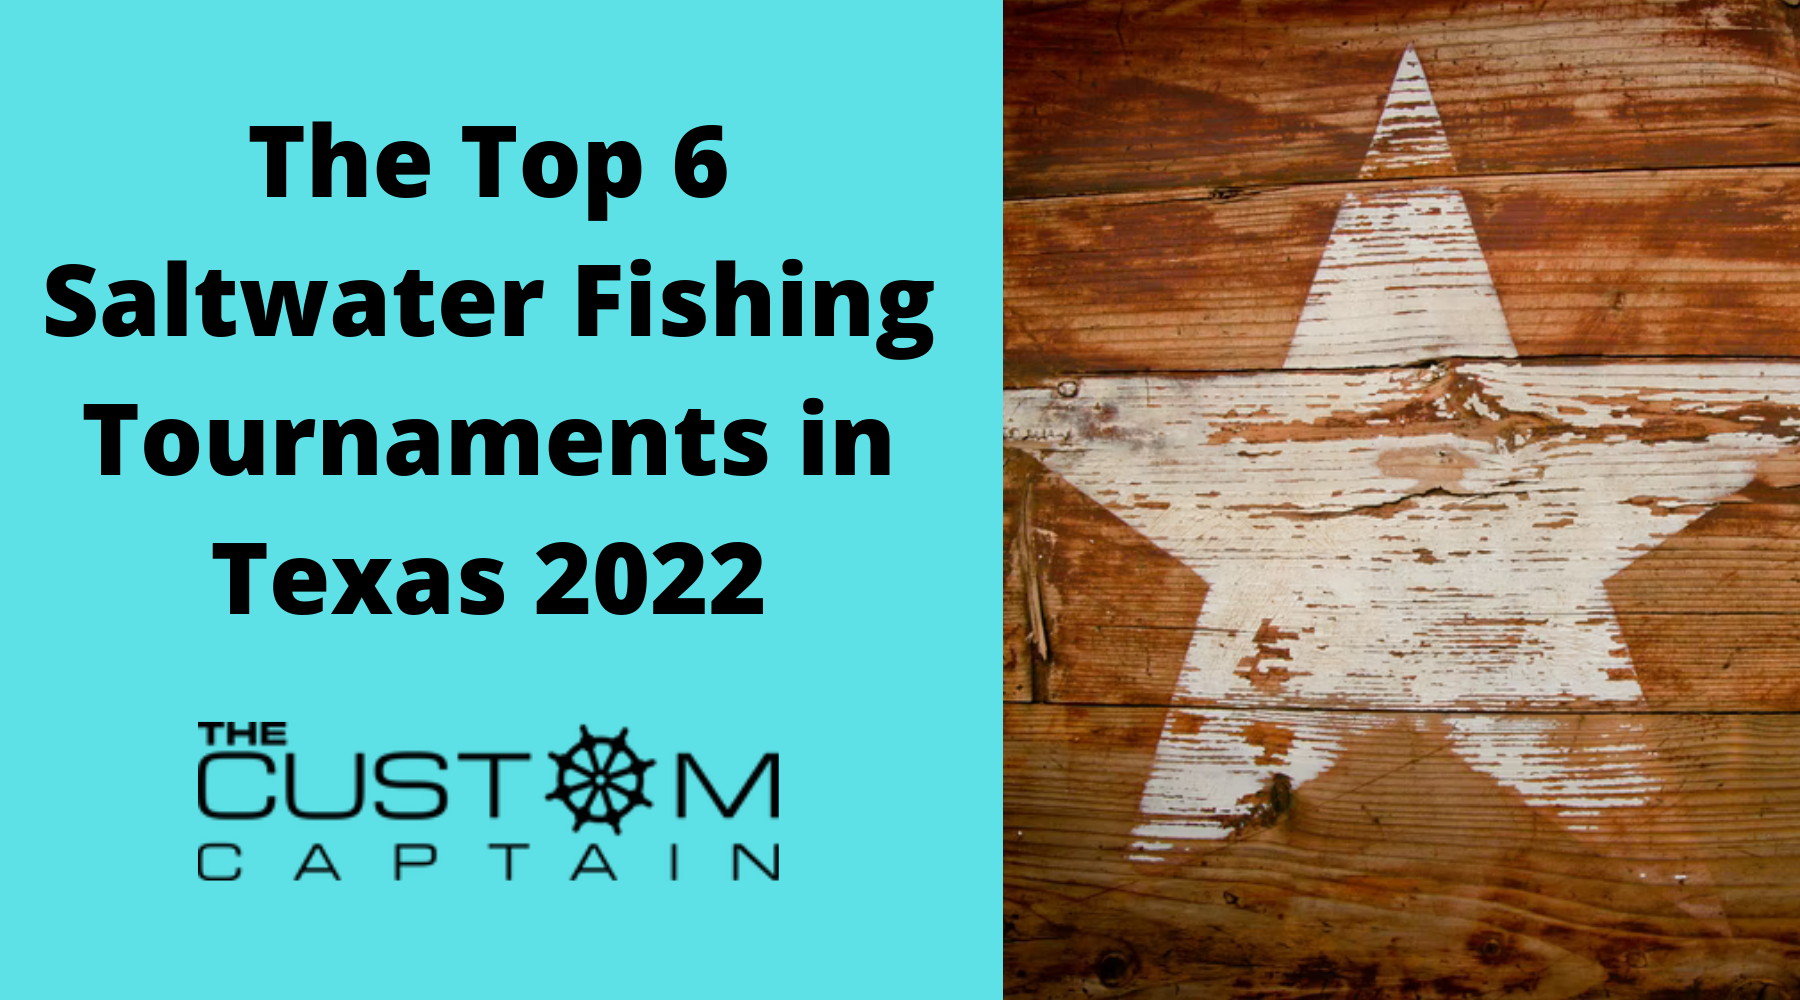 The Top 6 Saltwater Fishing Tournaments In Texas 2022